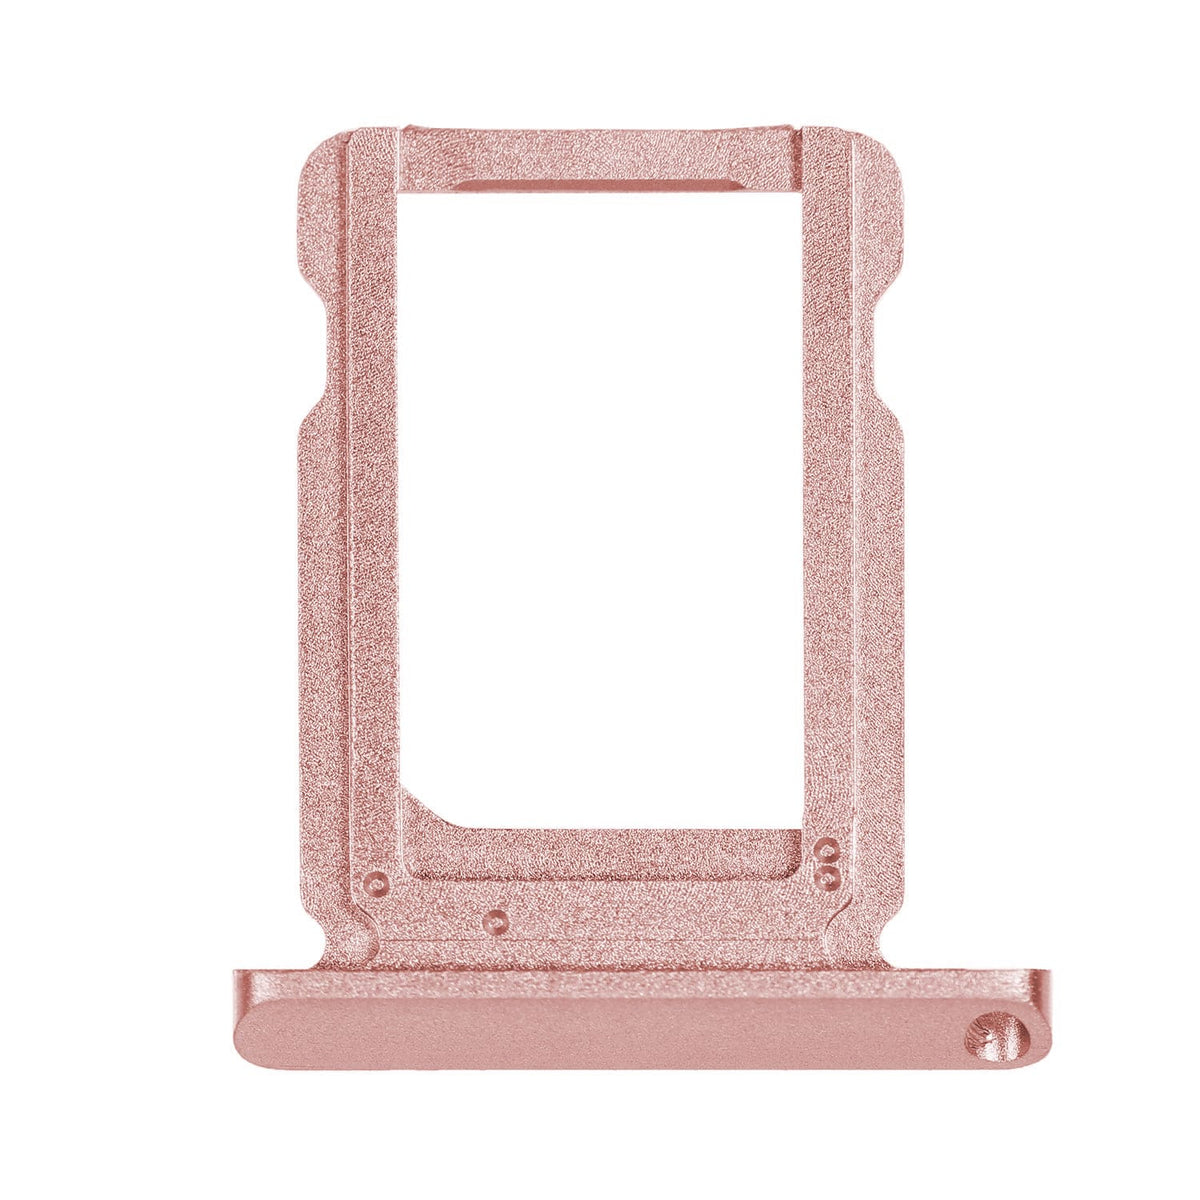 SIM CARD TRAY FOR IPAD 12.9 2ND GEN- ROSE